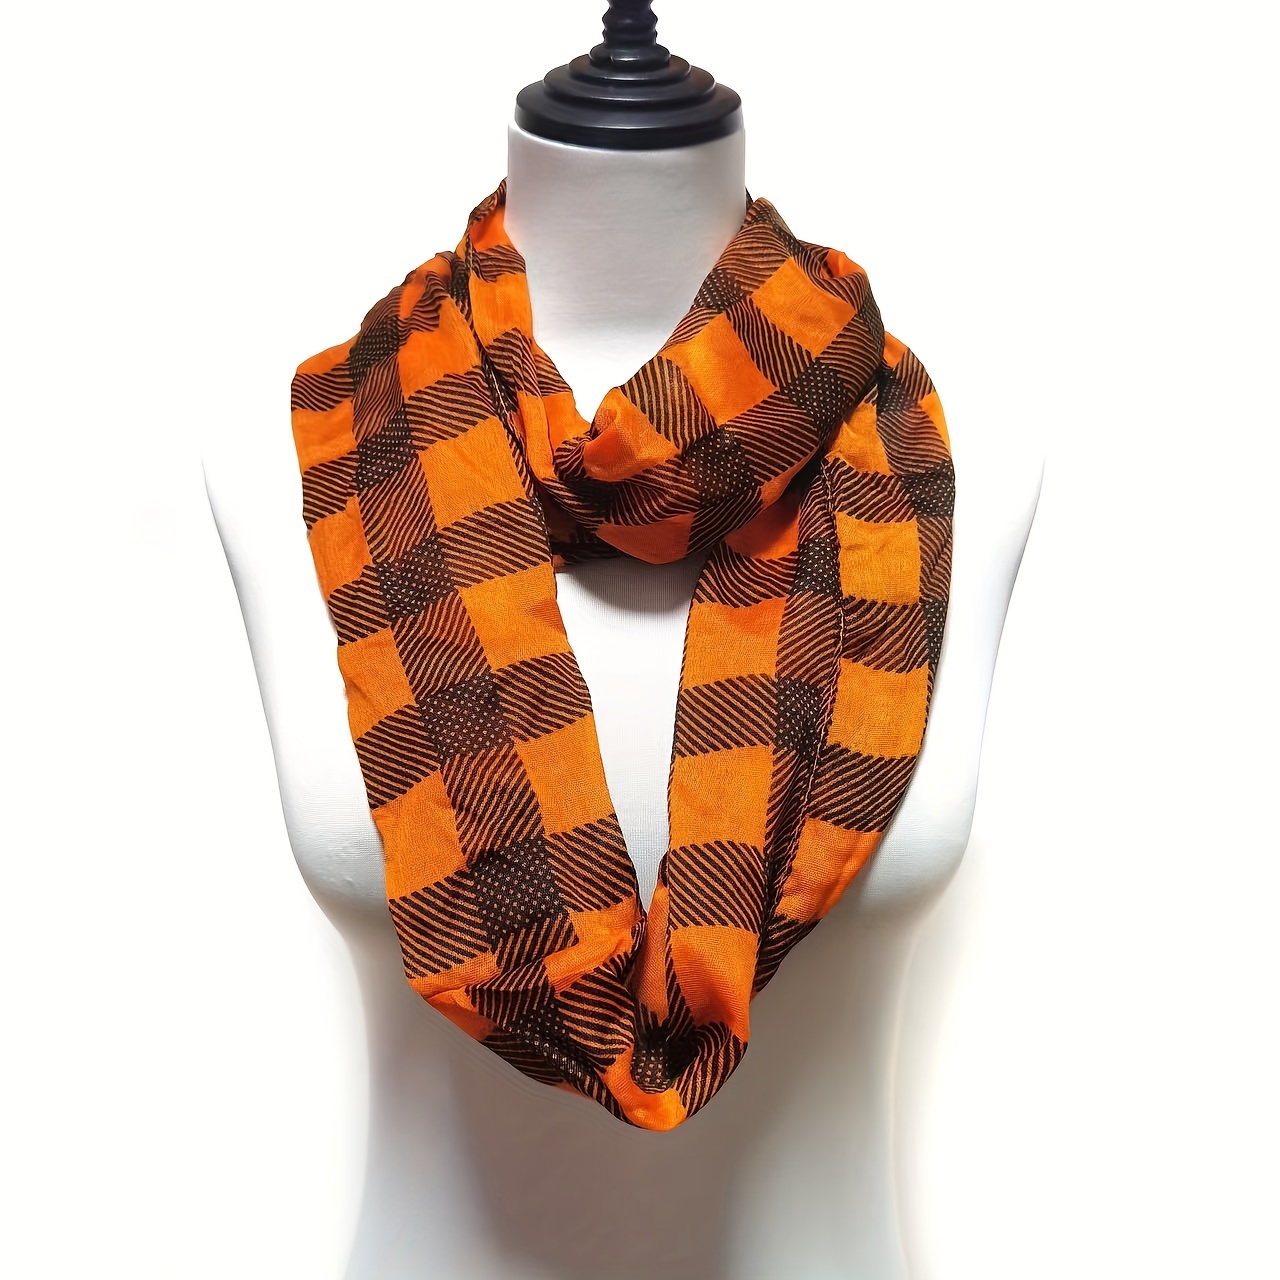 Winter Women's Hermes New War Horse Print Scarf Plaid Thick Cashmere Luxury  Plaid Scarf Warm Multif